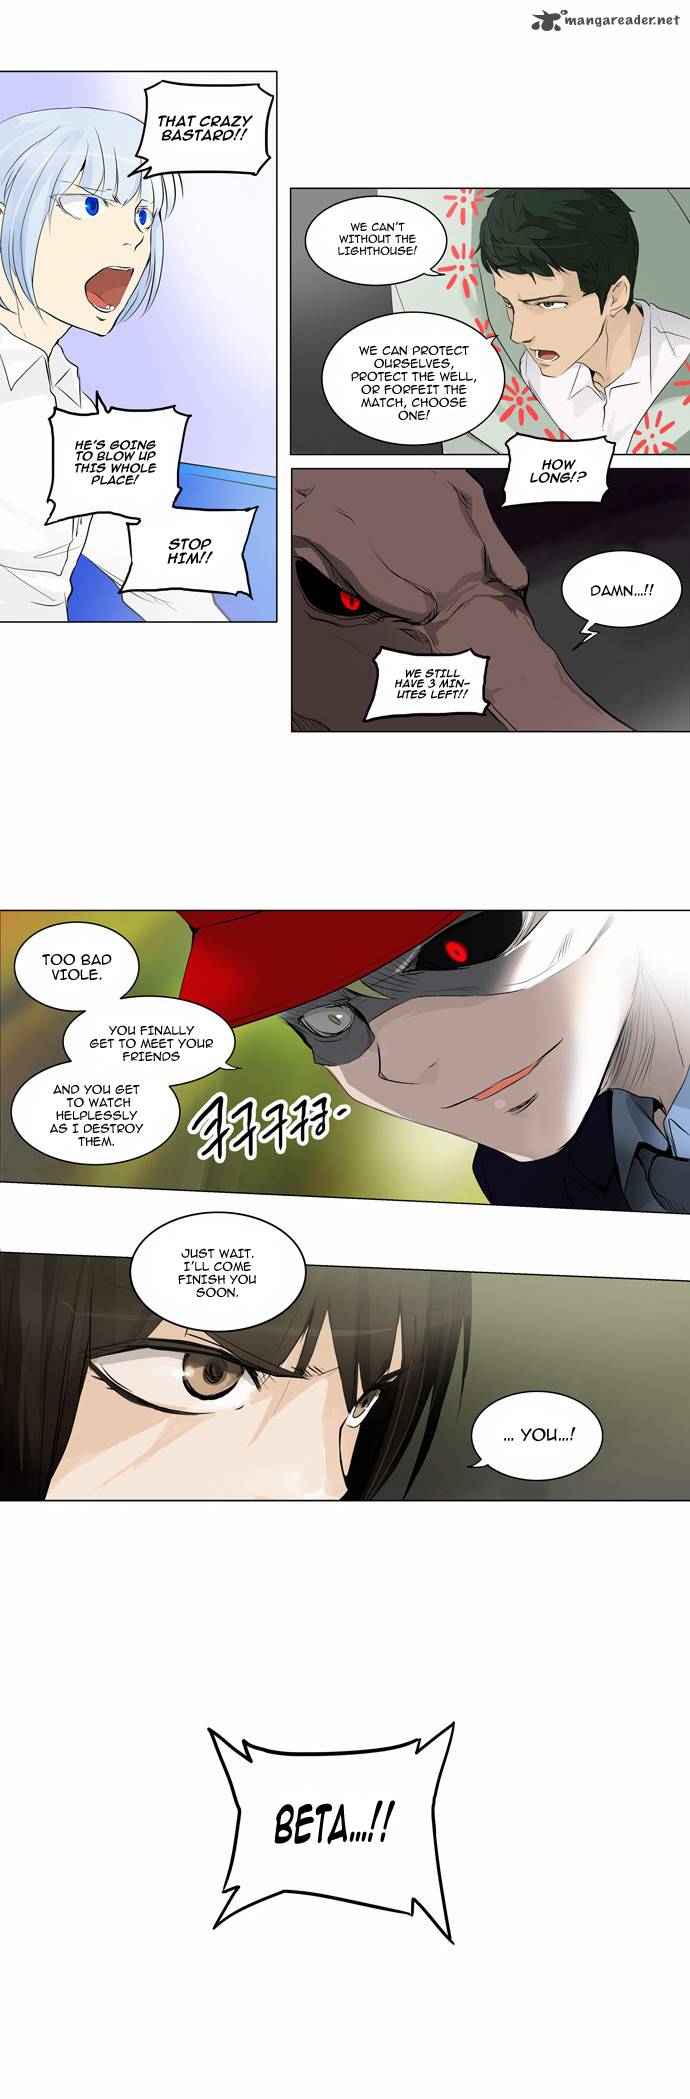 Tower Of God 174 16